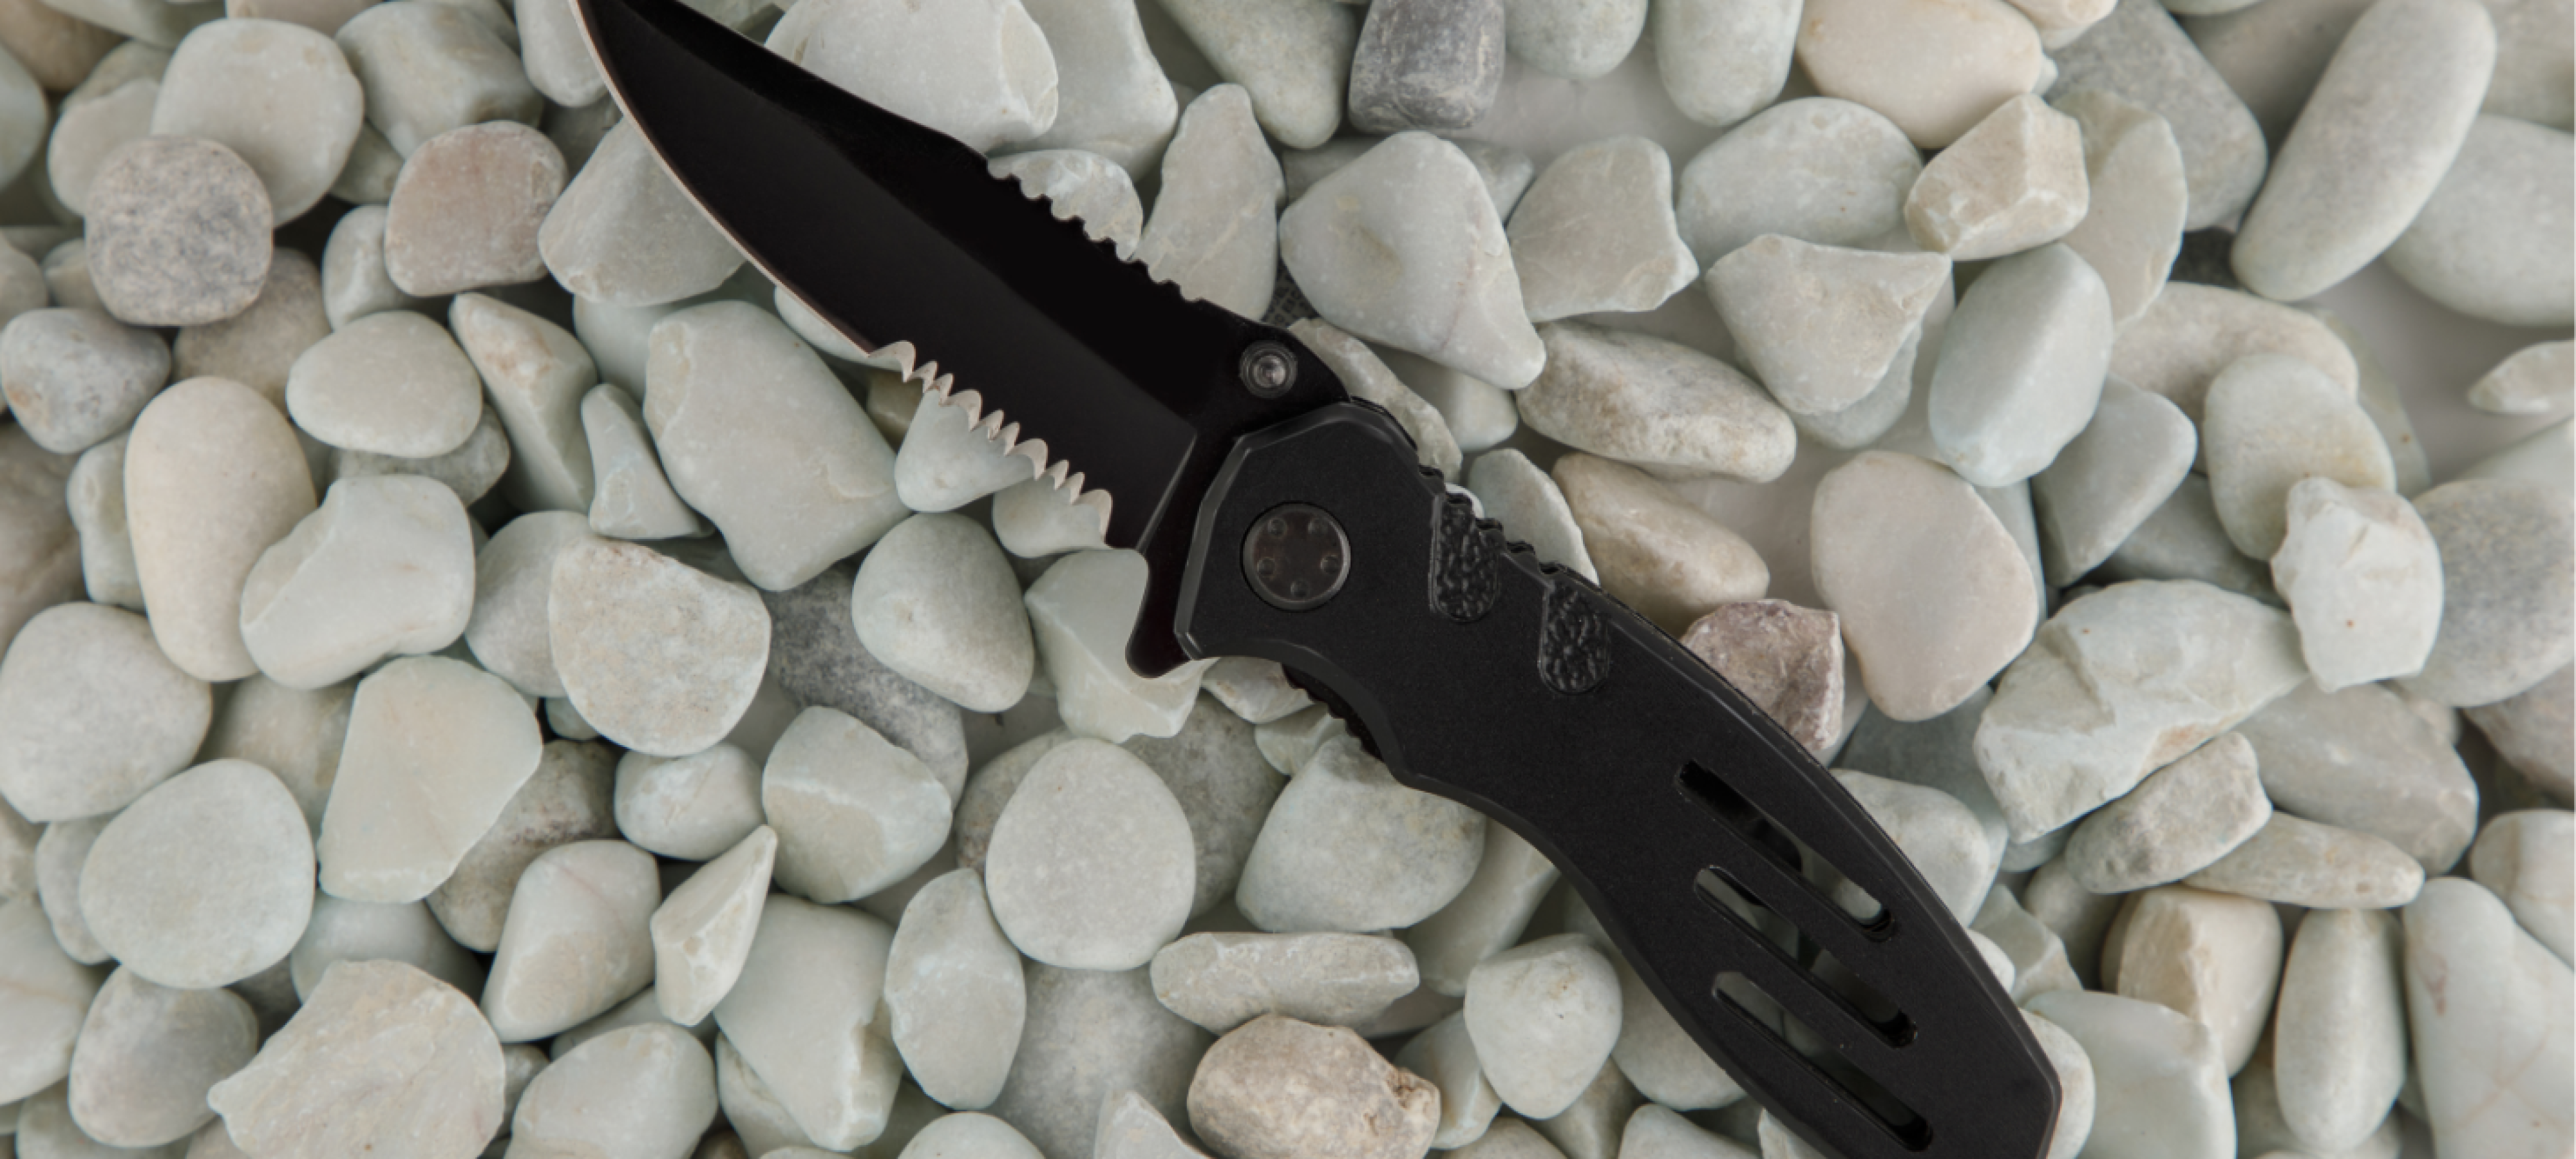 Professionally Tested Petty Knives A Detailed Review for Buyers